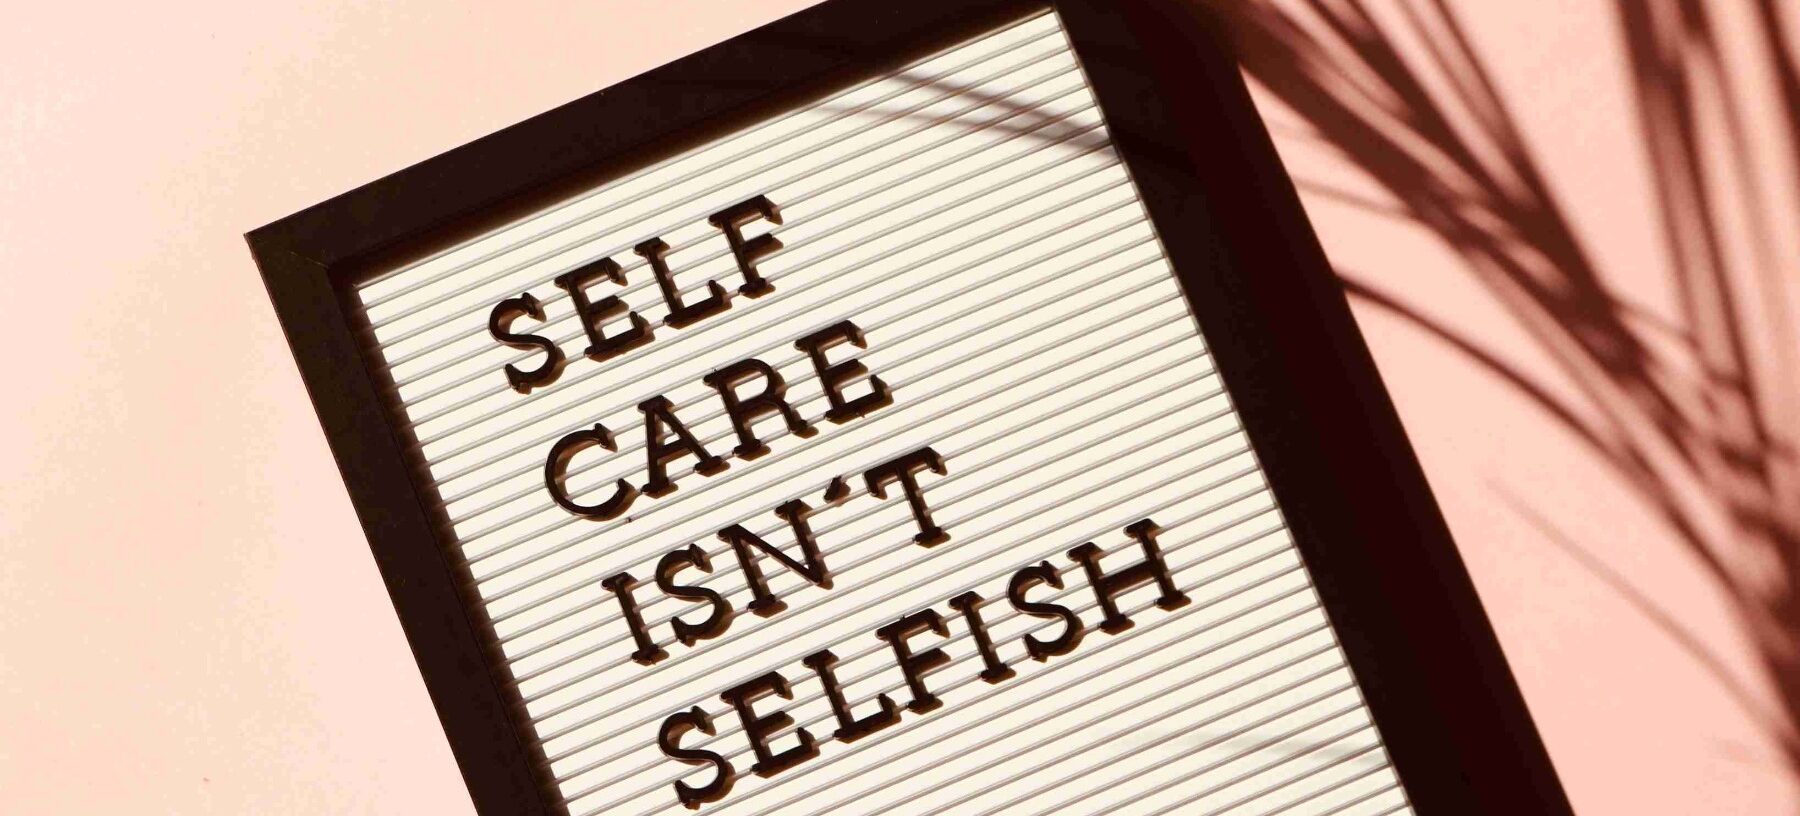 one of the best health apps is self care app